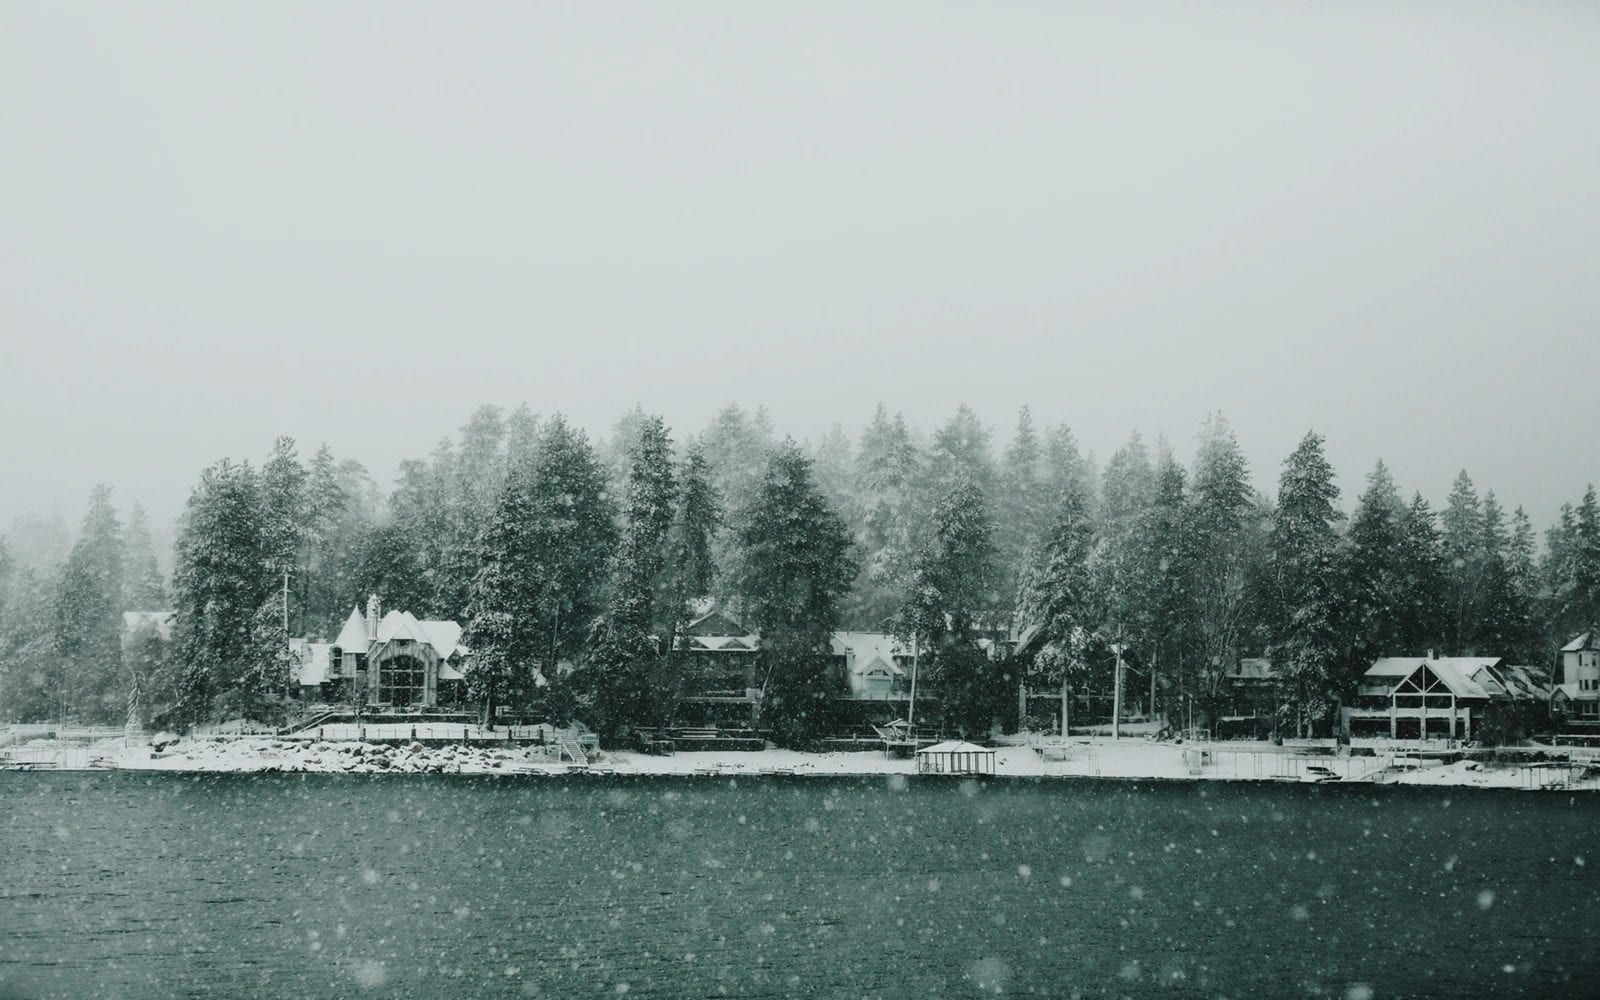 Lakeside homes in a winter storm.